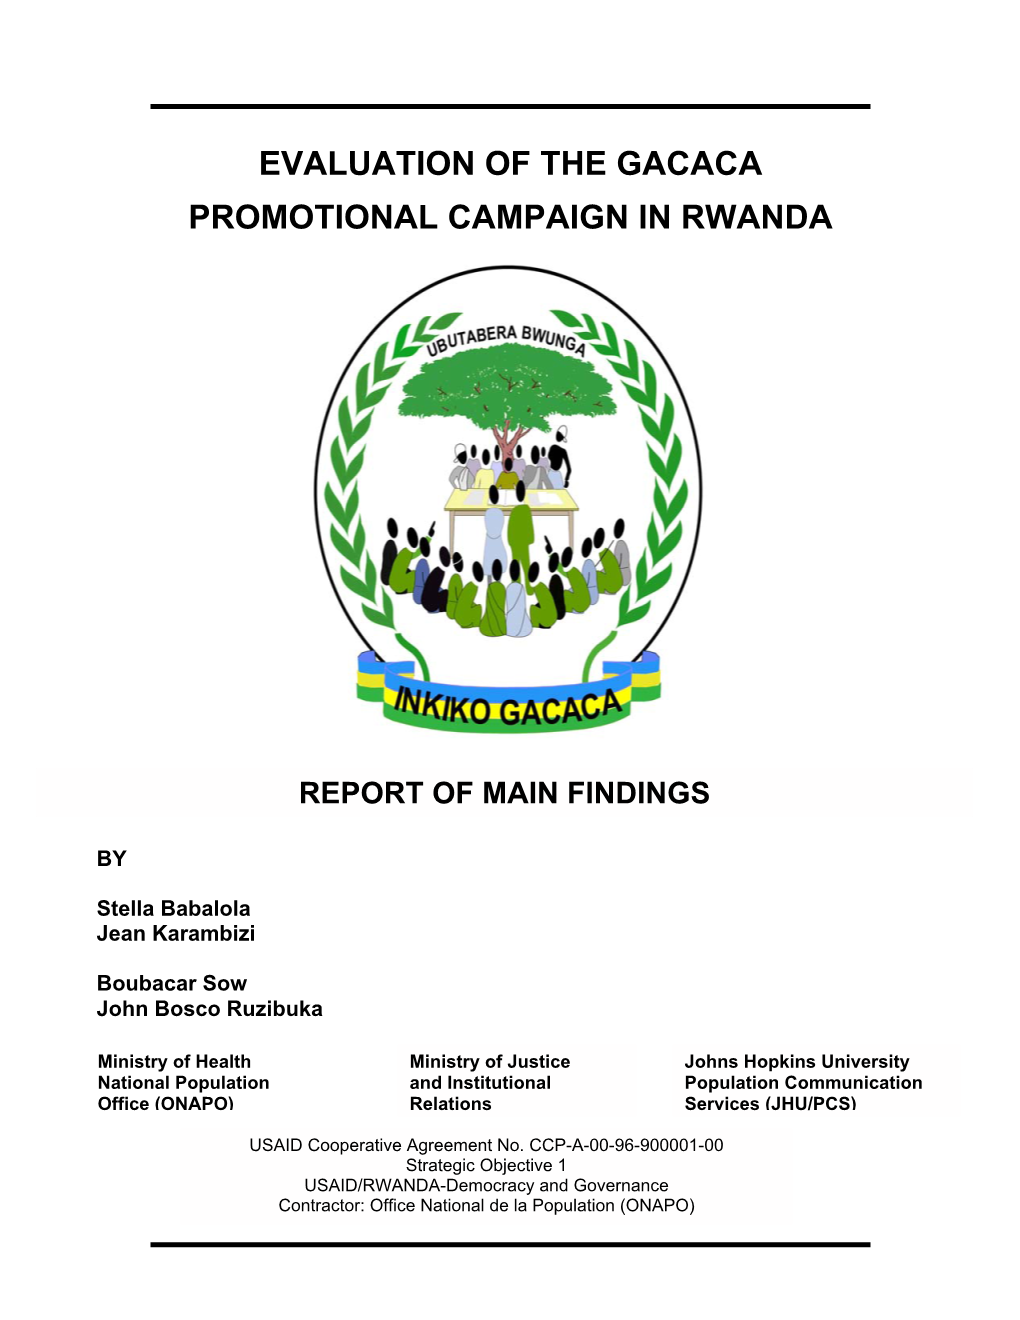 Evaluation of the Gacaca Promotional Campaign in Rwanda